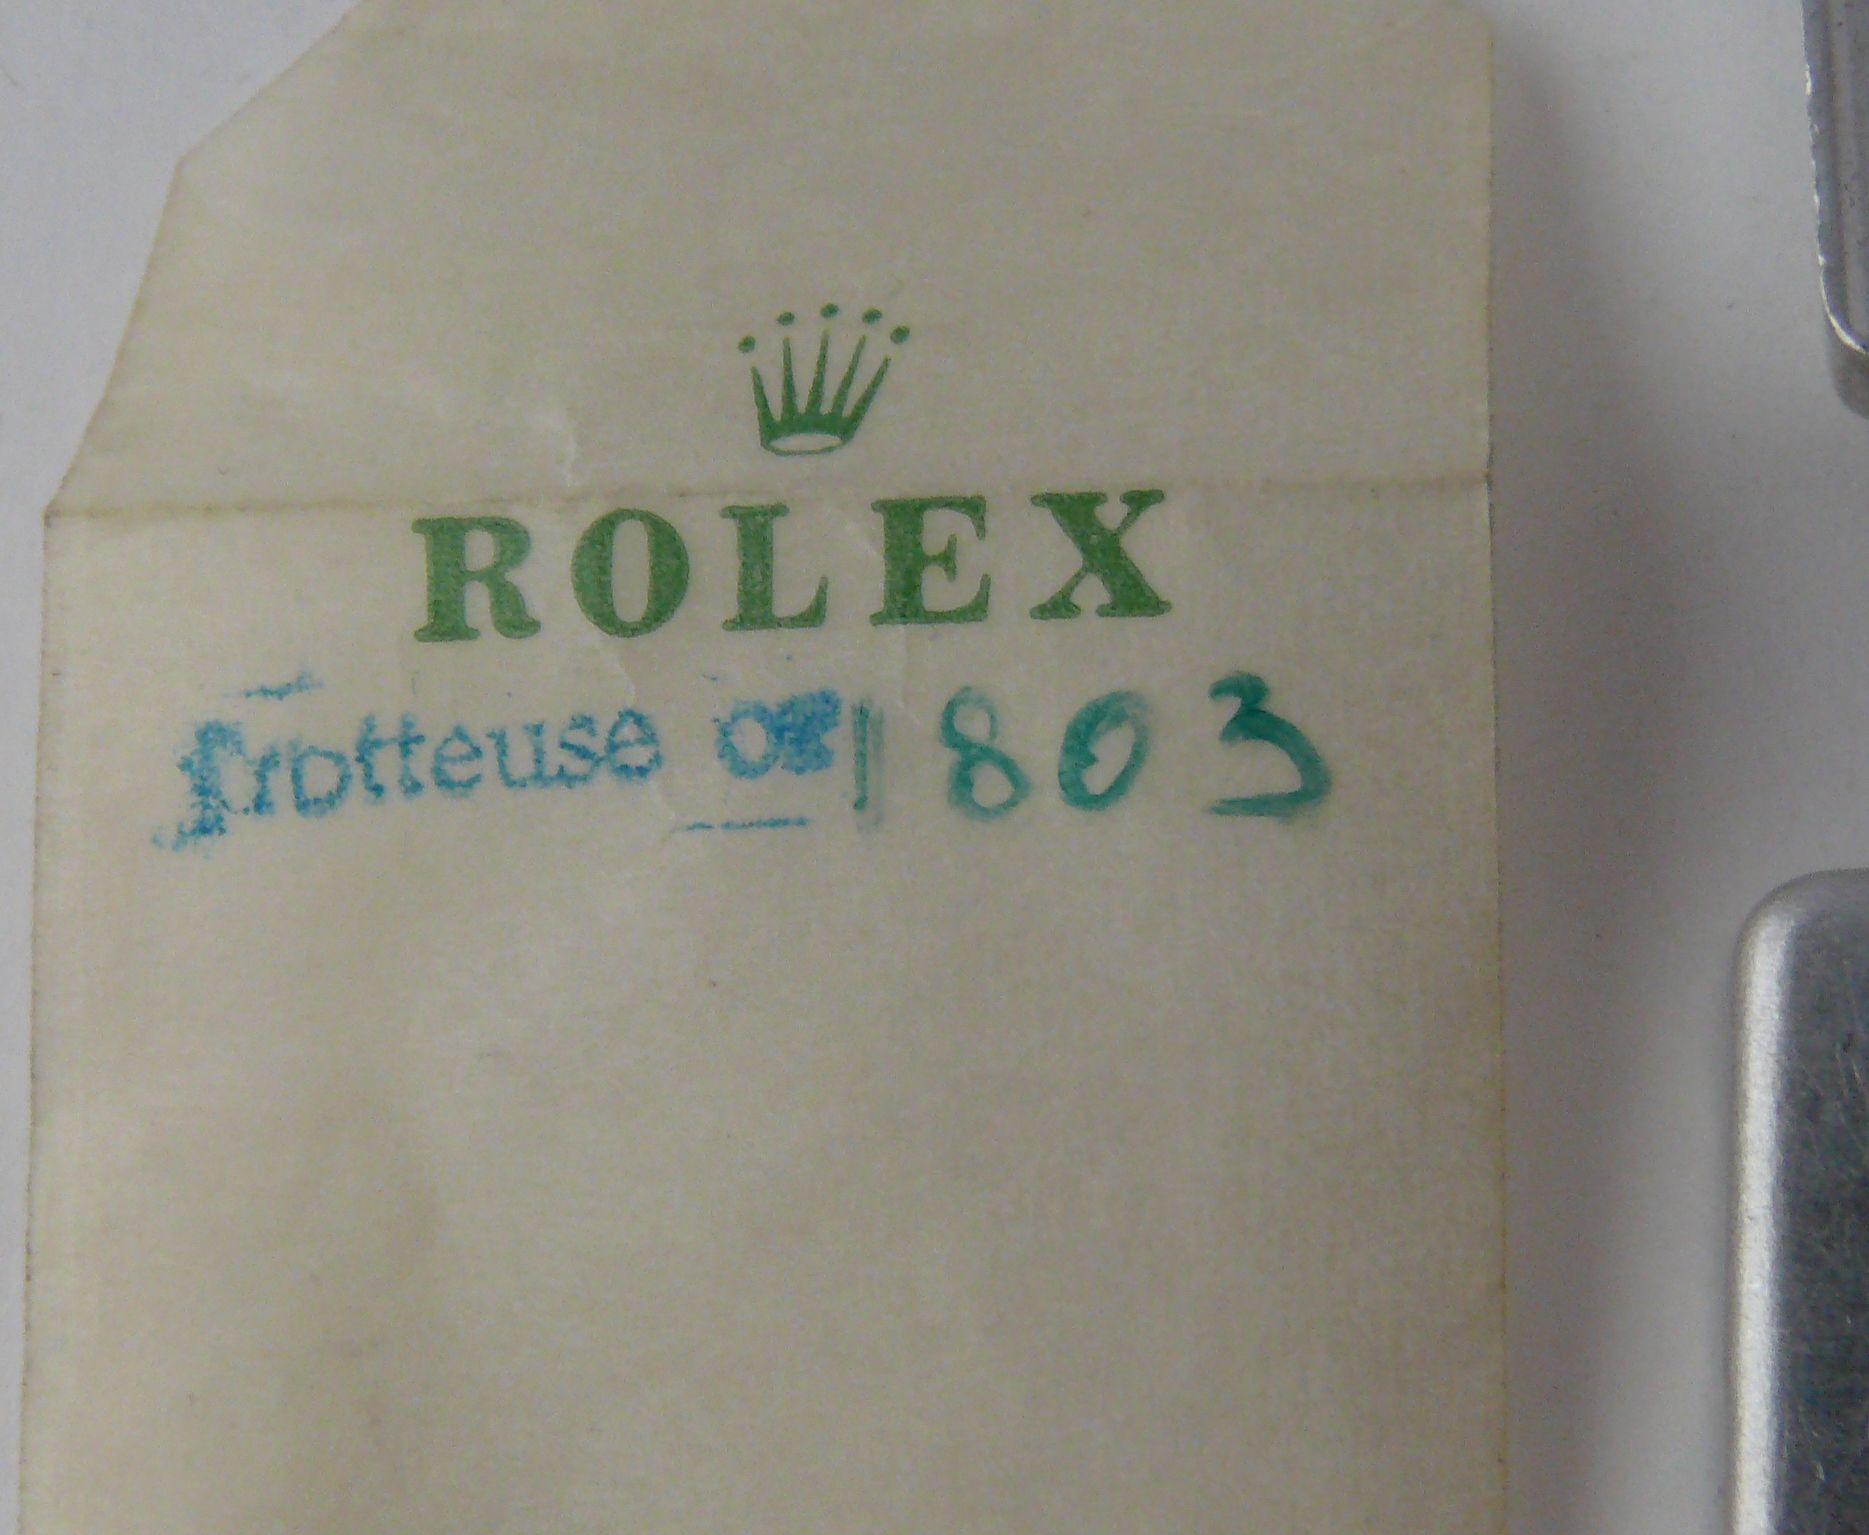 Vintage Rolex Trotteuse 1803 Day date Packet plus a metal parts box - Image 2 of 2